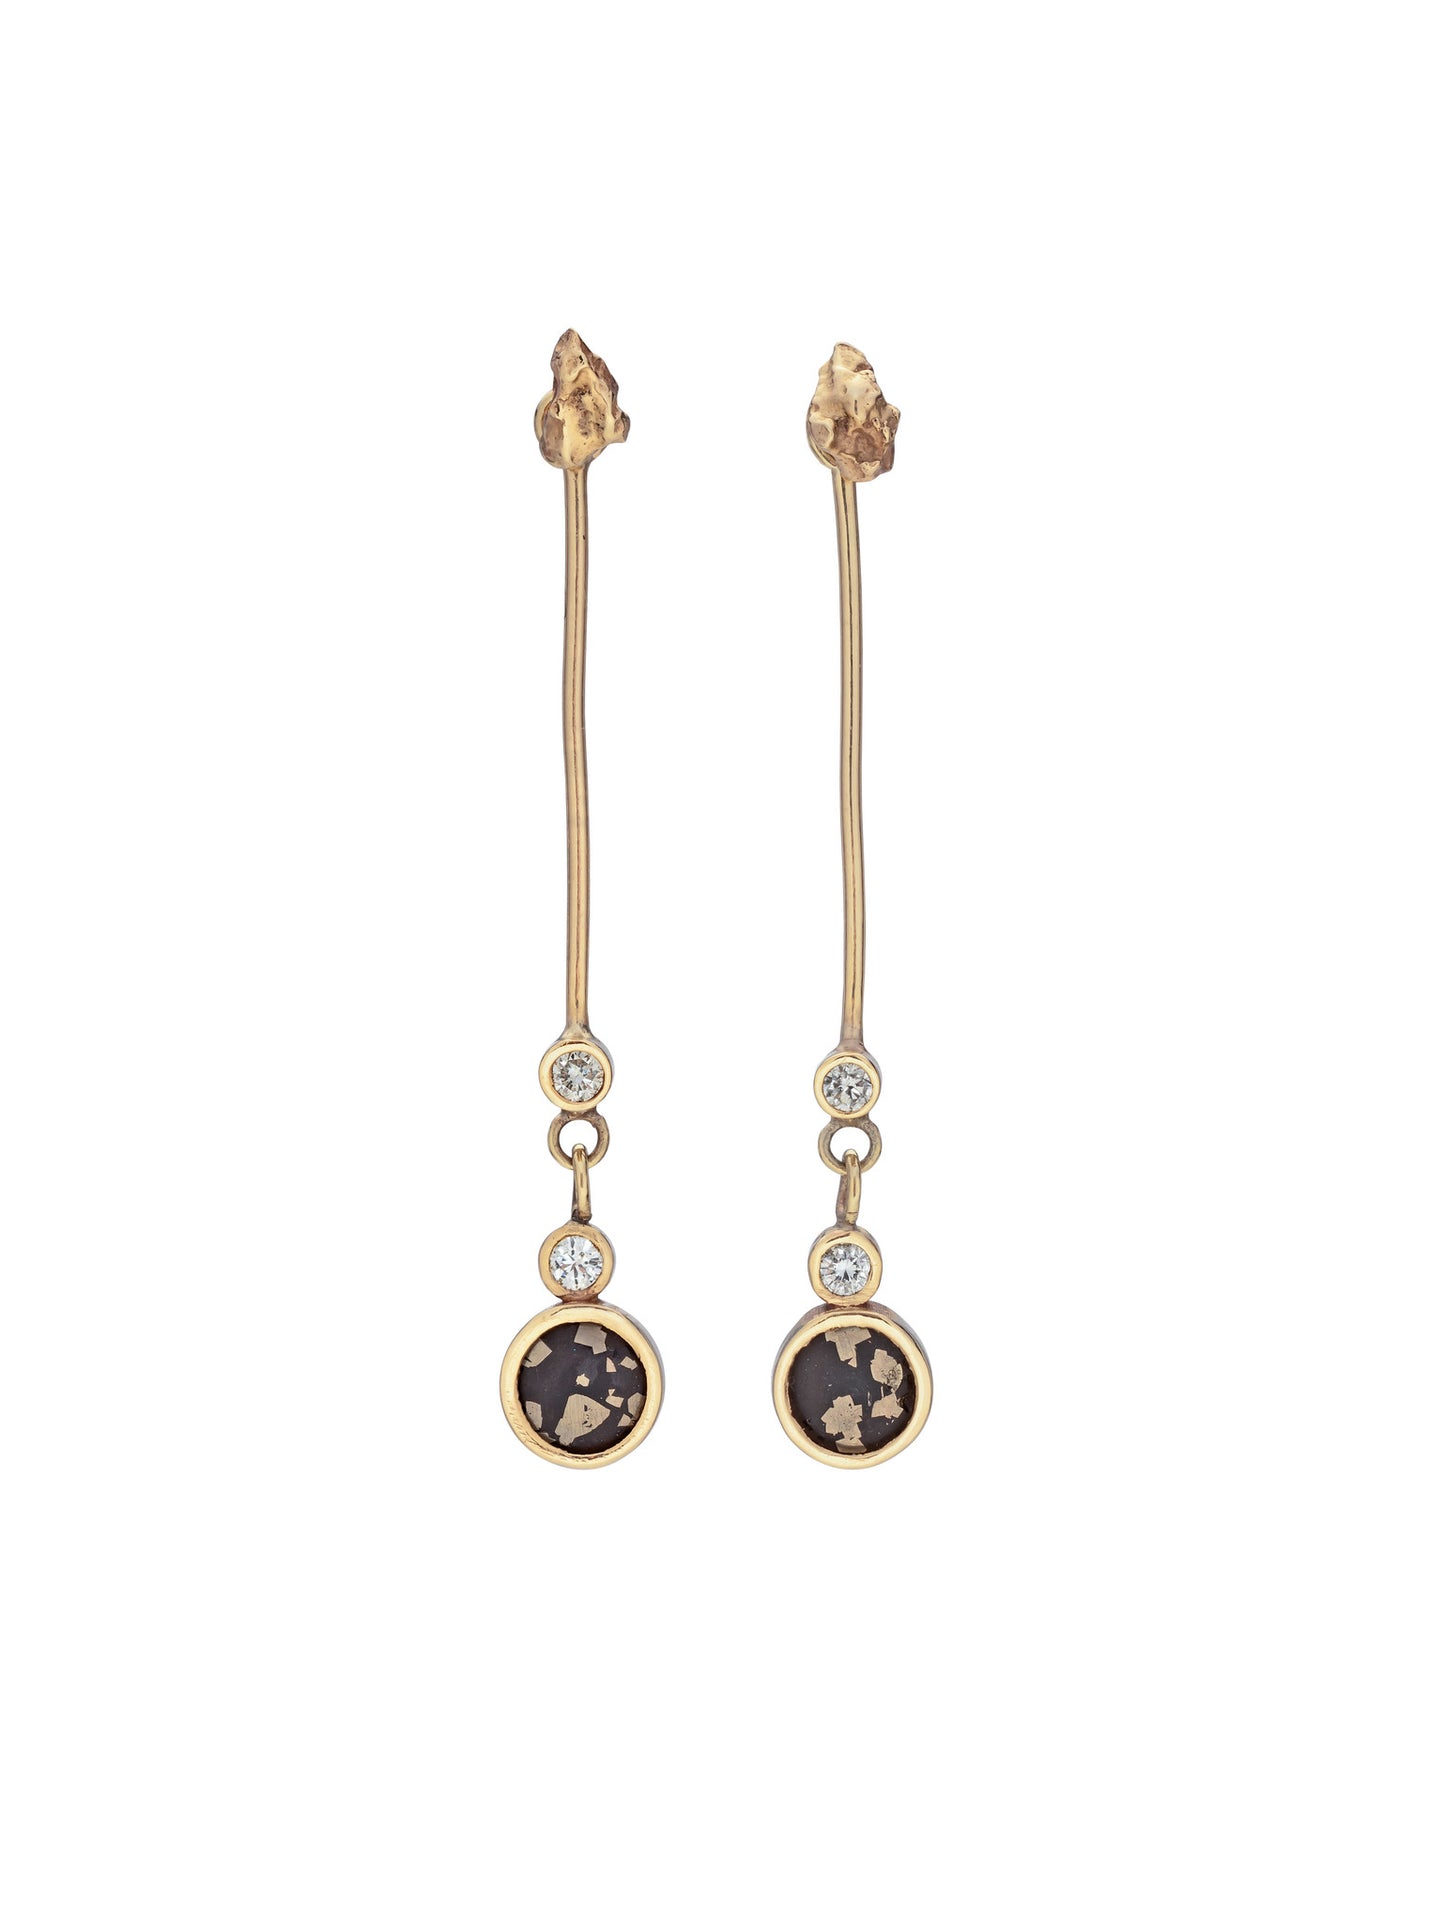 Dangly Stellar Black and Gold stems with diamonds